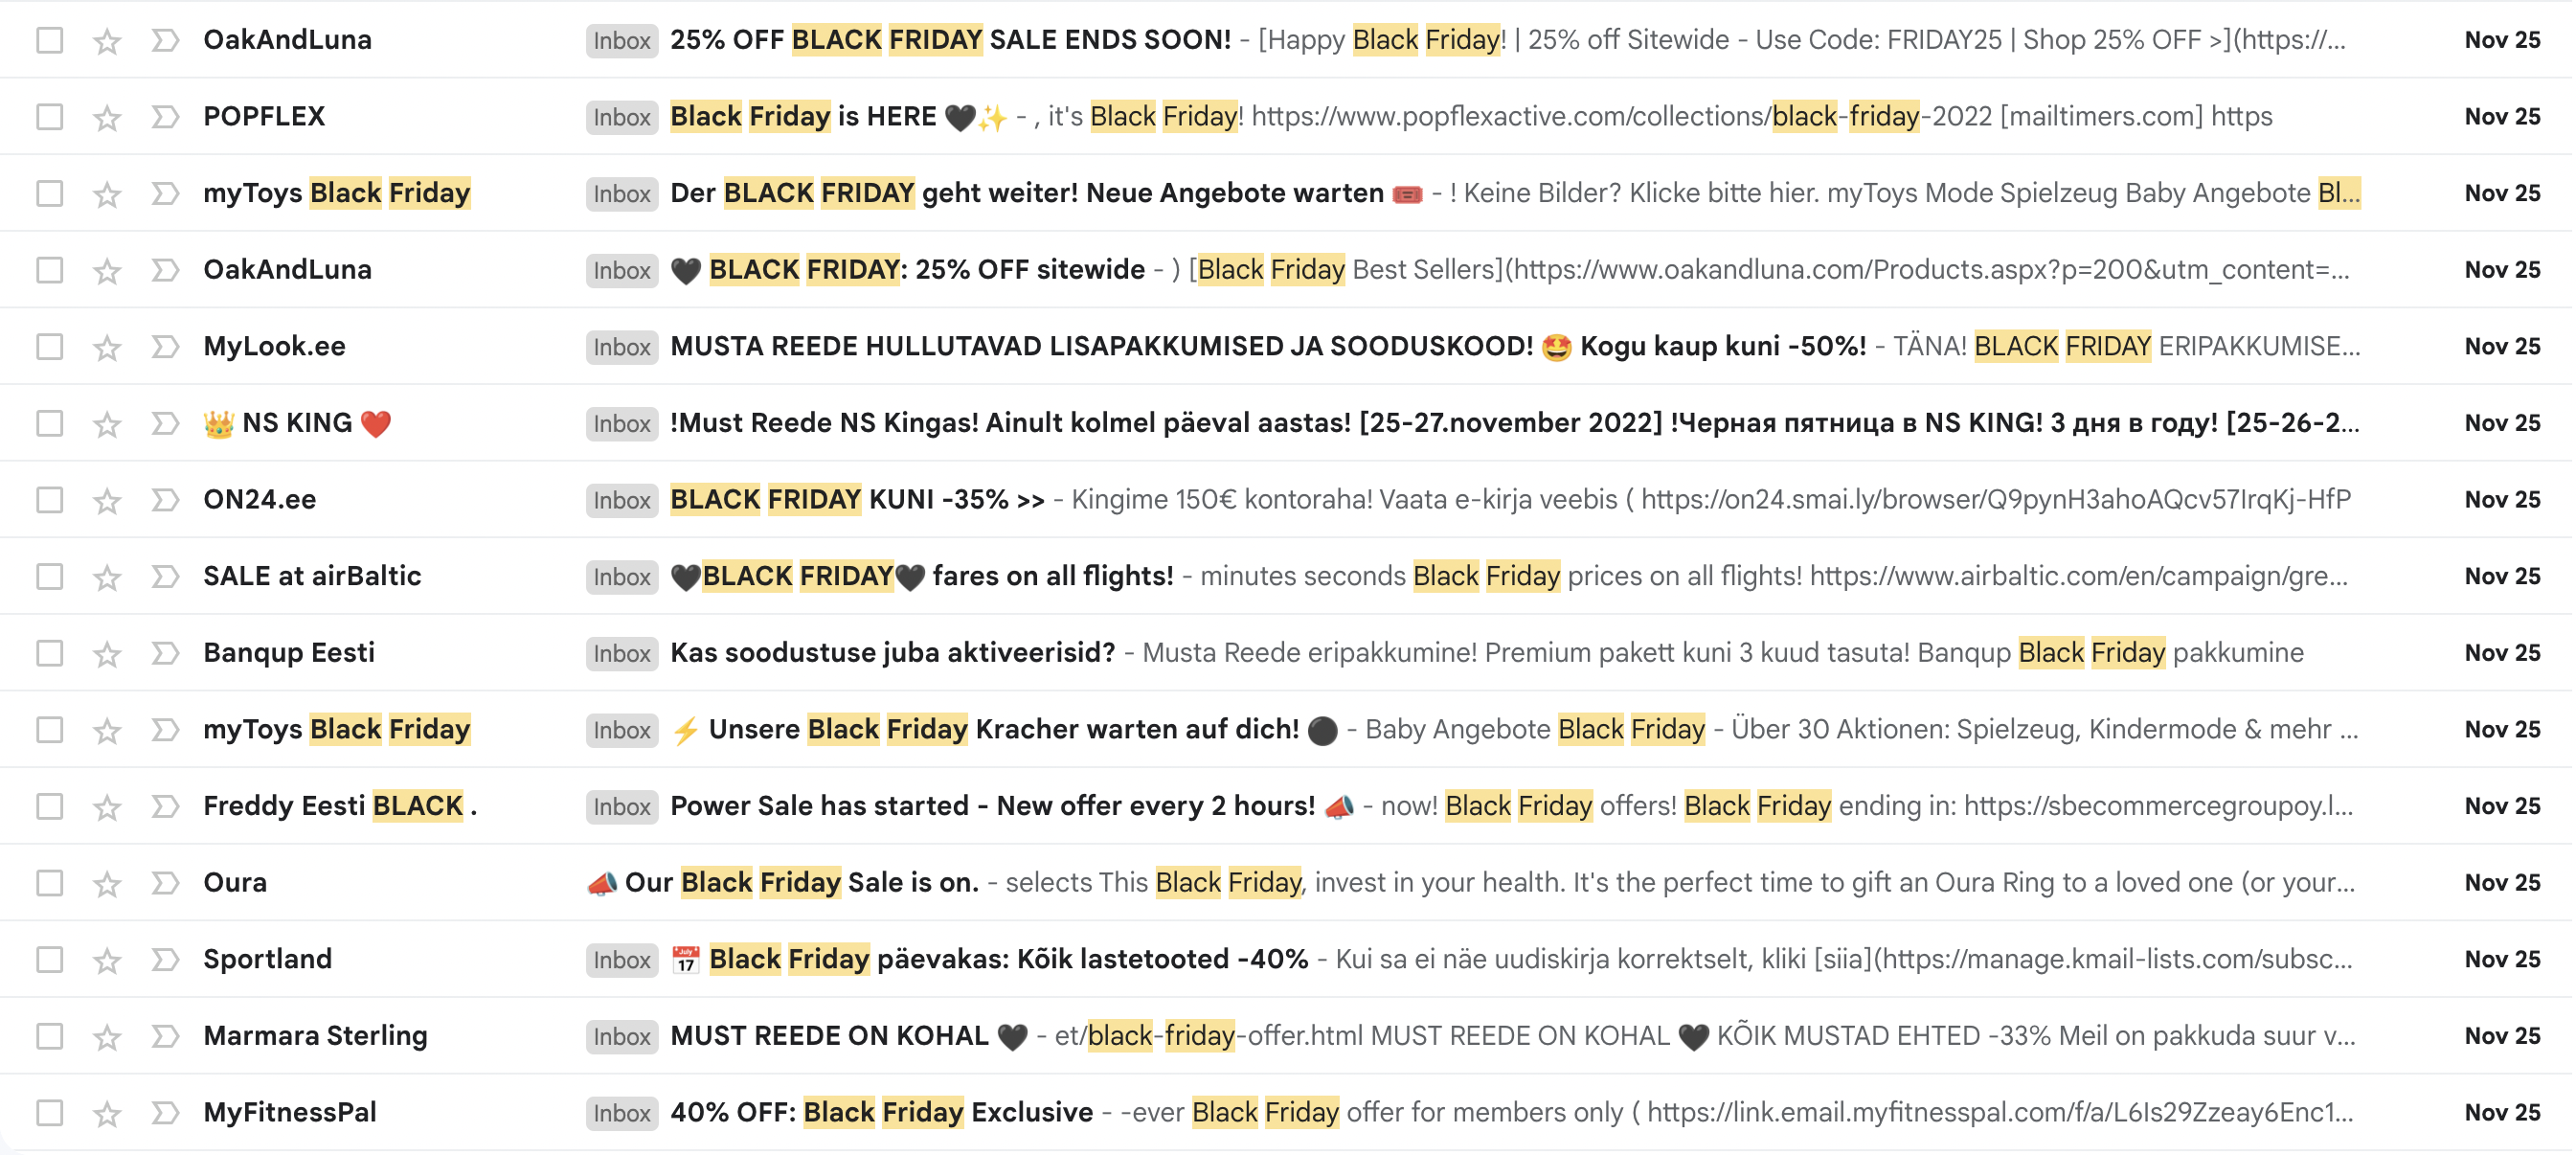 Black Friday offers in the mailbox 2022